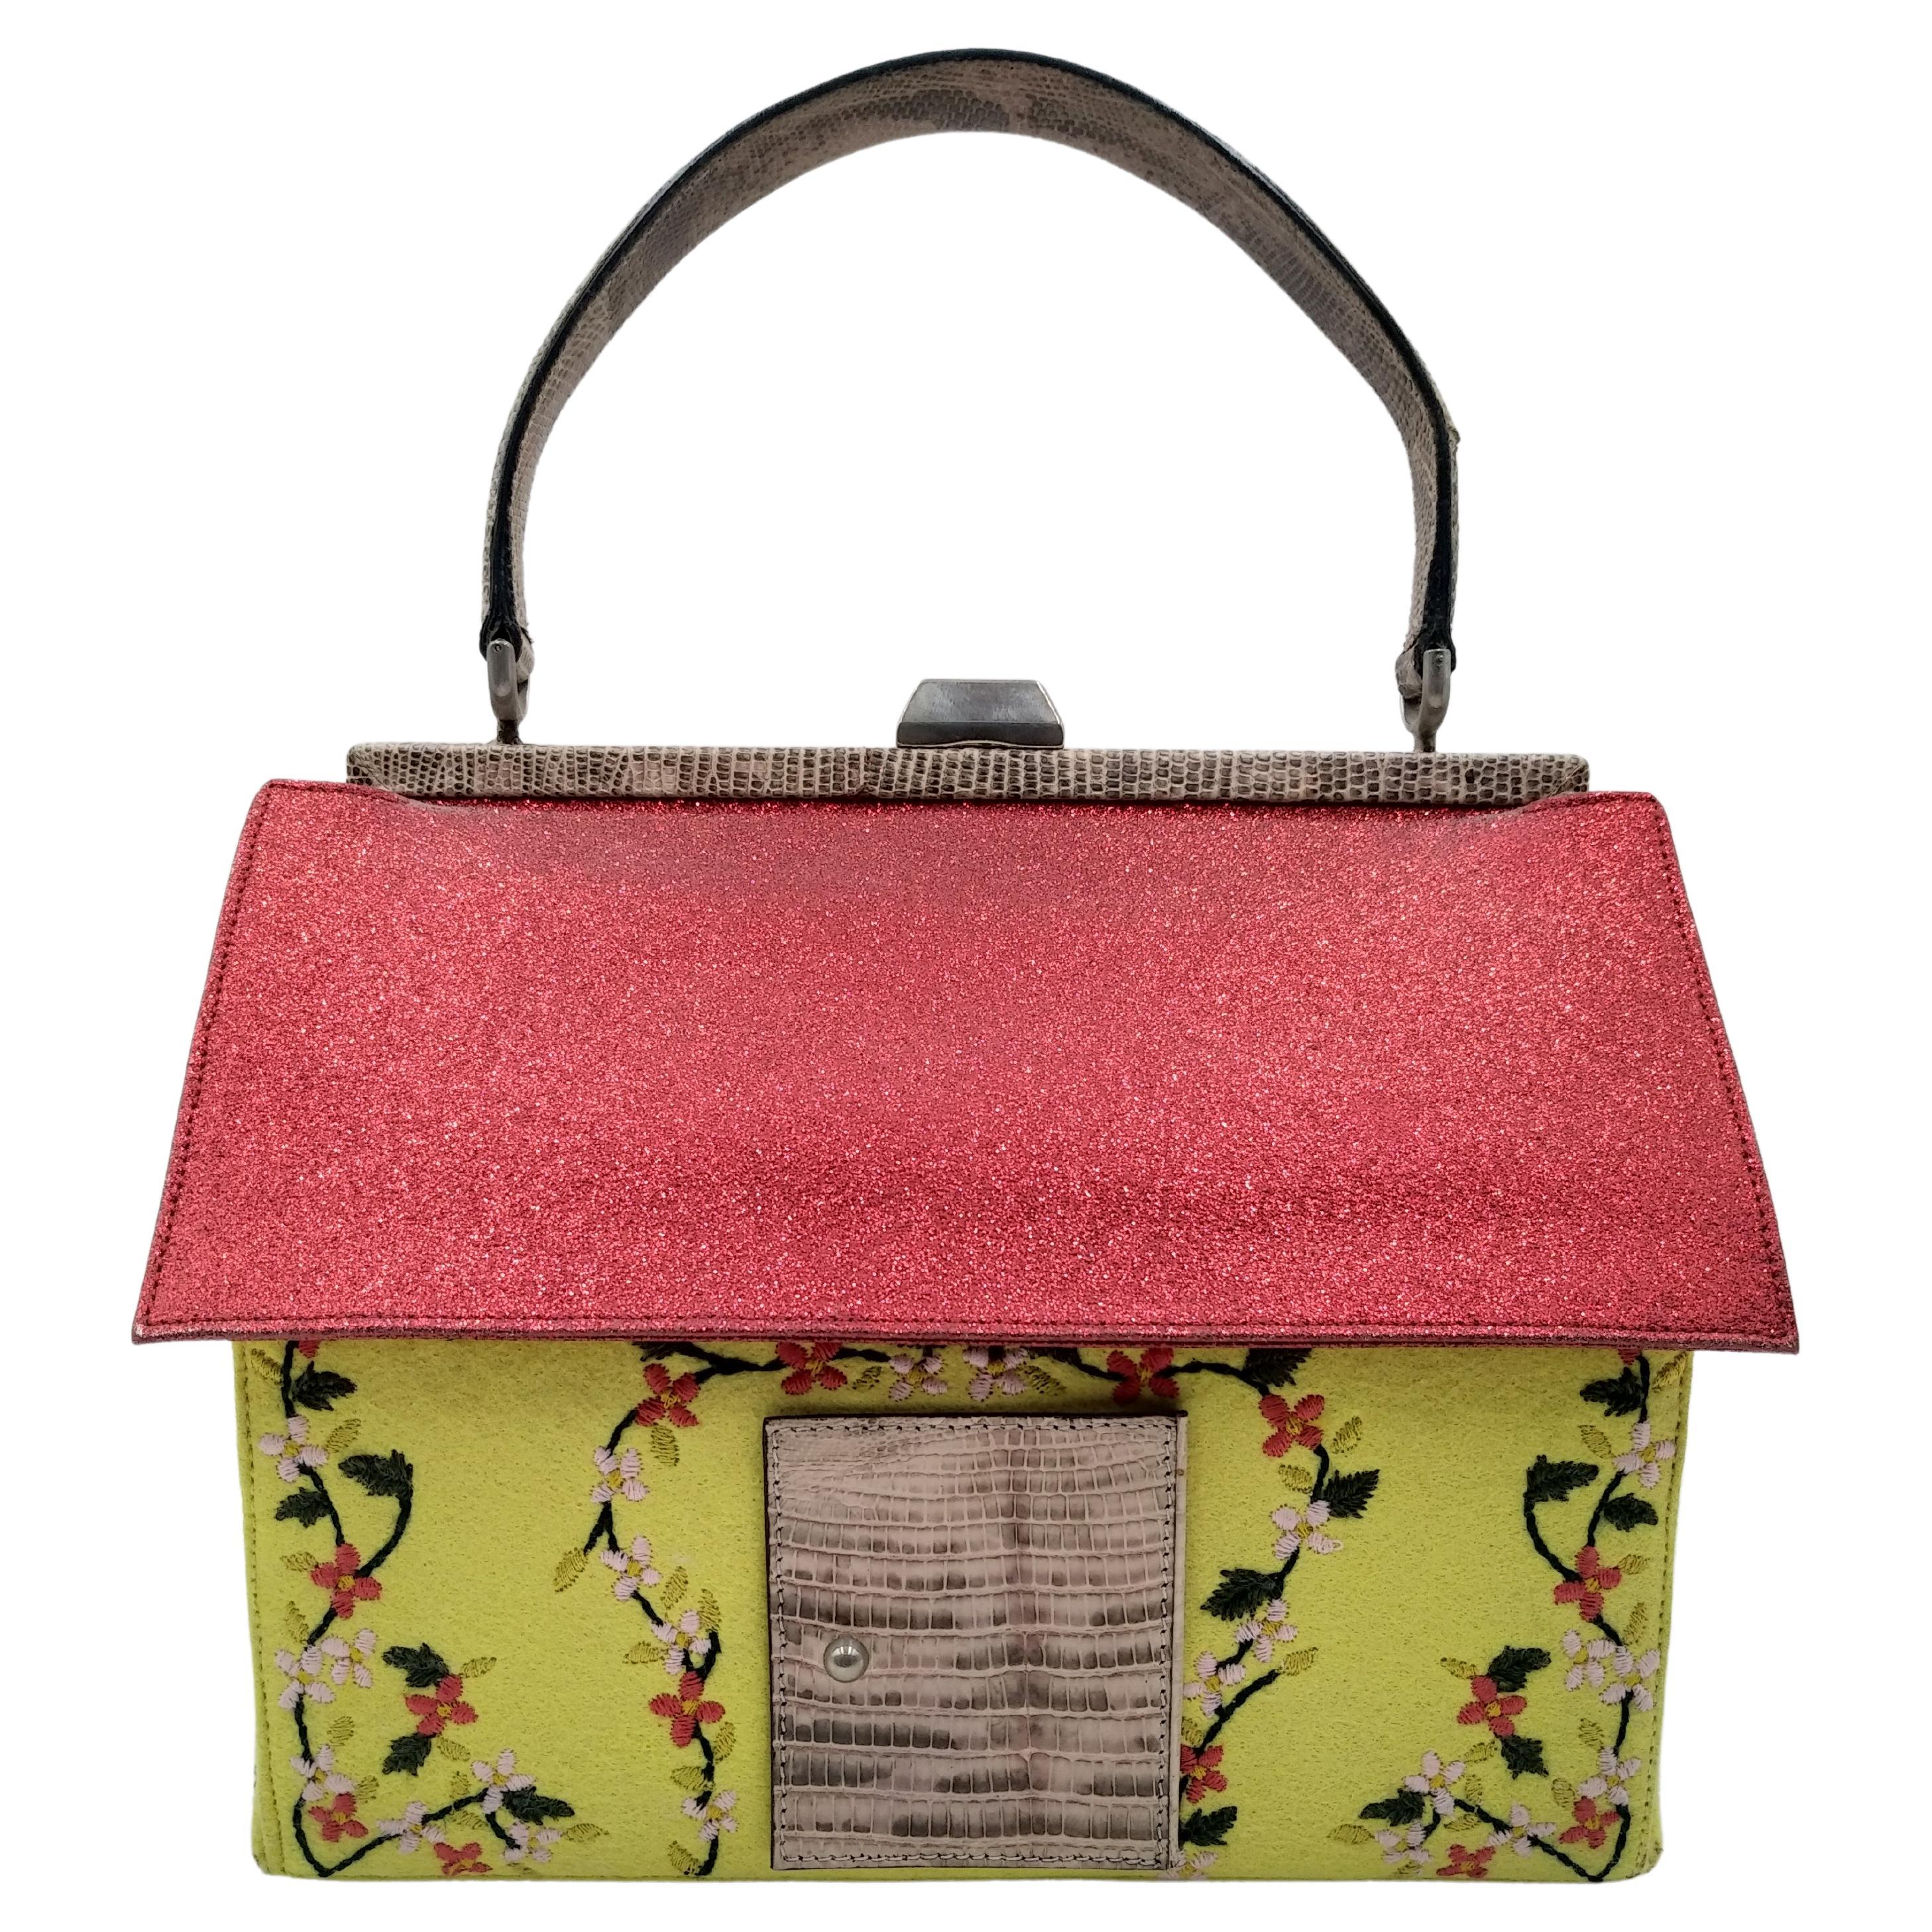 Moschino Hansel and Gretel gingerbread house bag For Sale